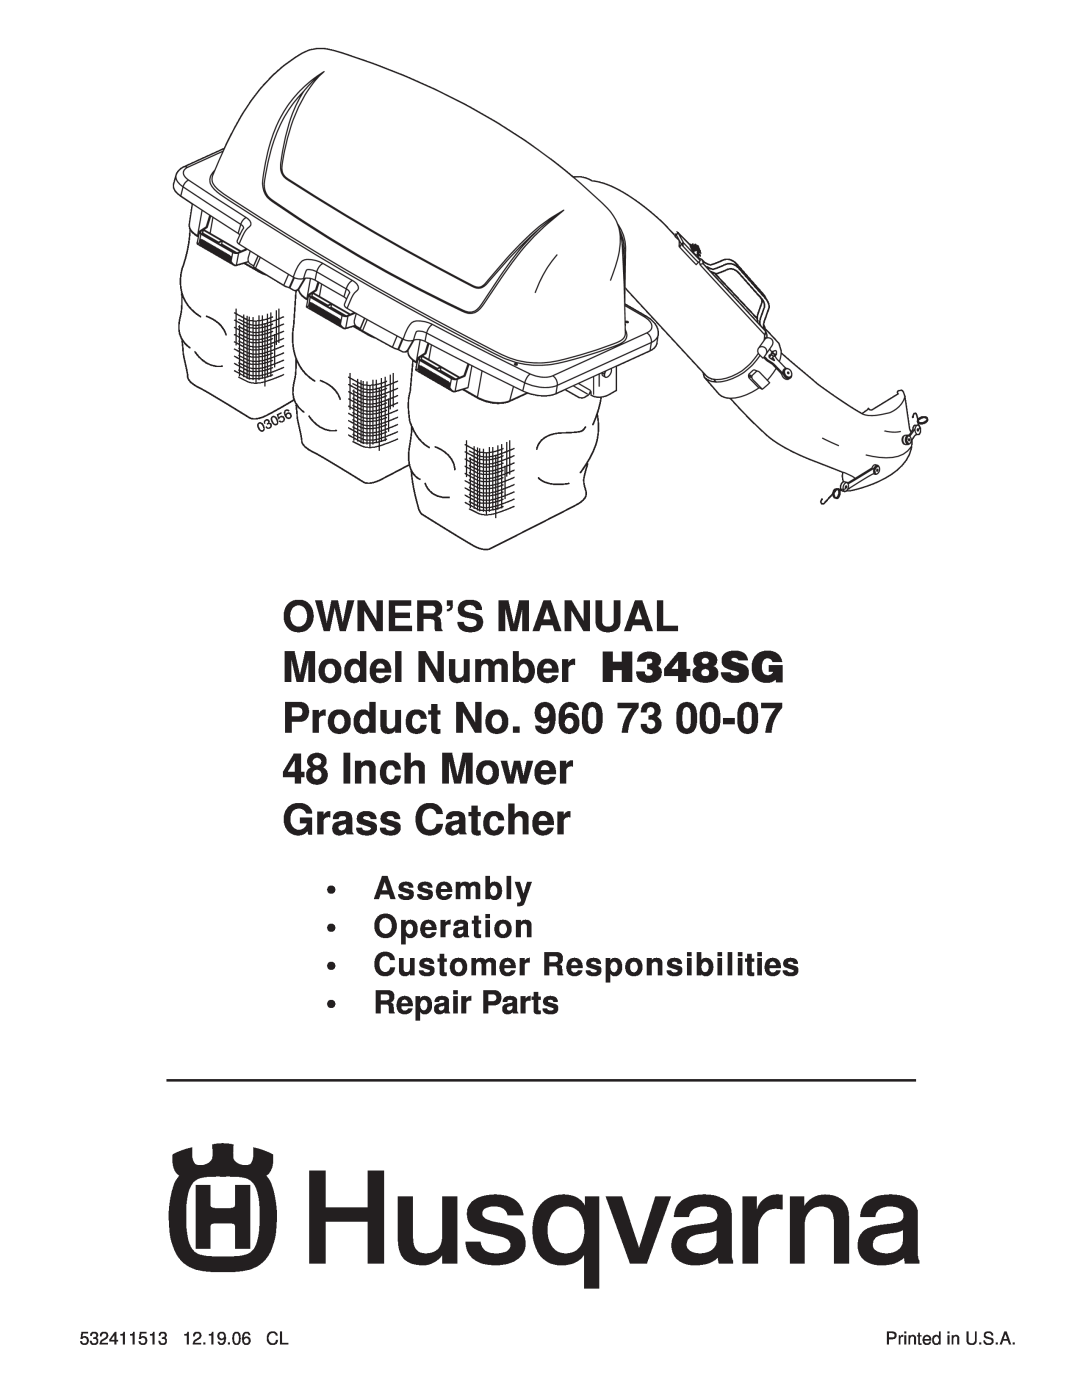 Husqvarna owner manual OWNER’S MANUAL Model Number H348SG Product No. 960 73 48 Inch Mower, Grass Catcher 